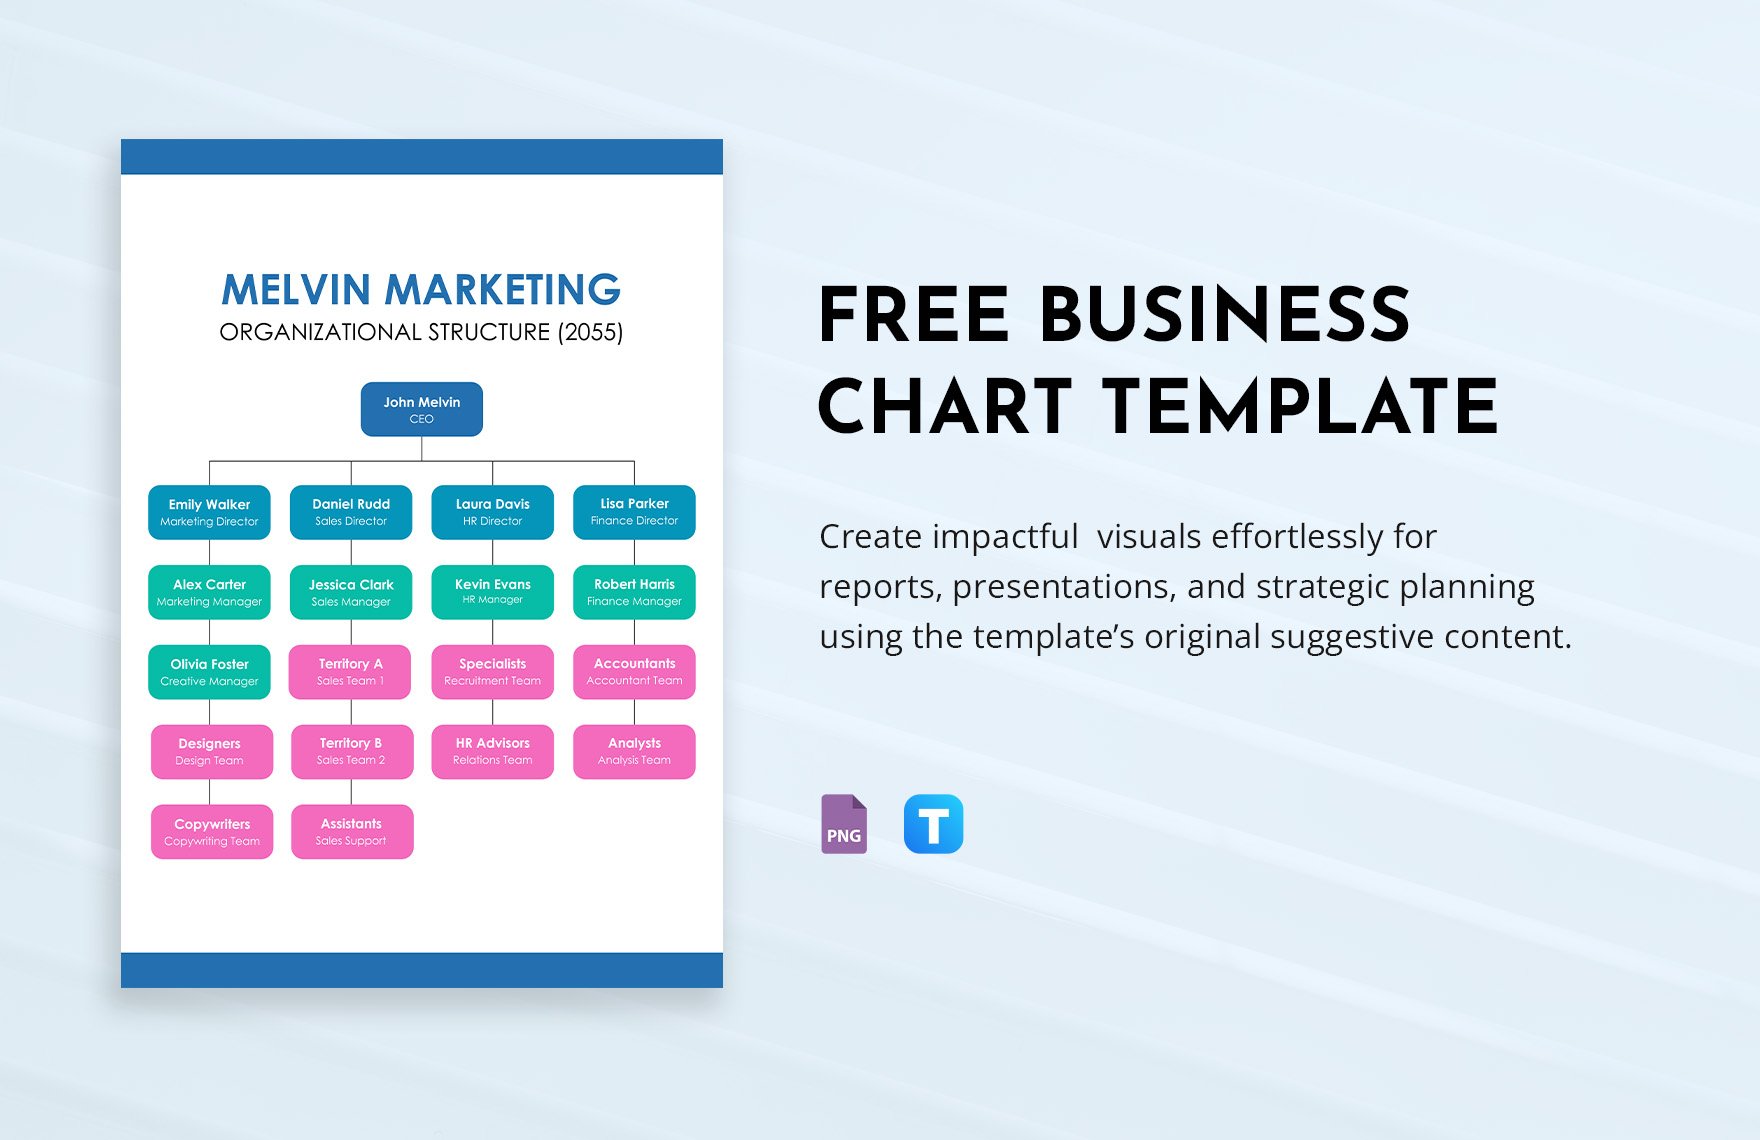 Free Business Chart Template in PNG